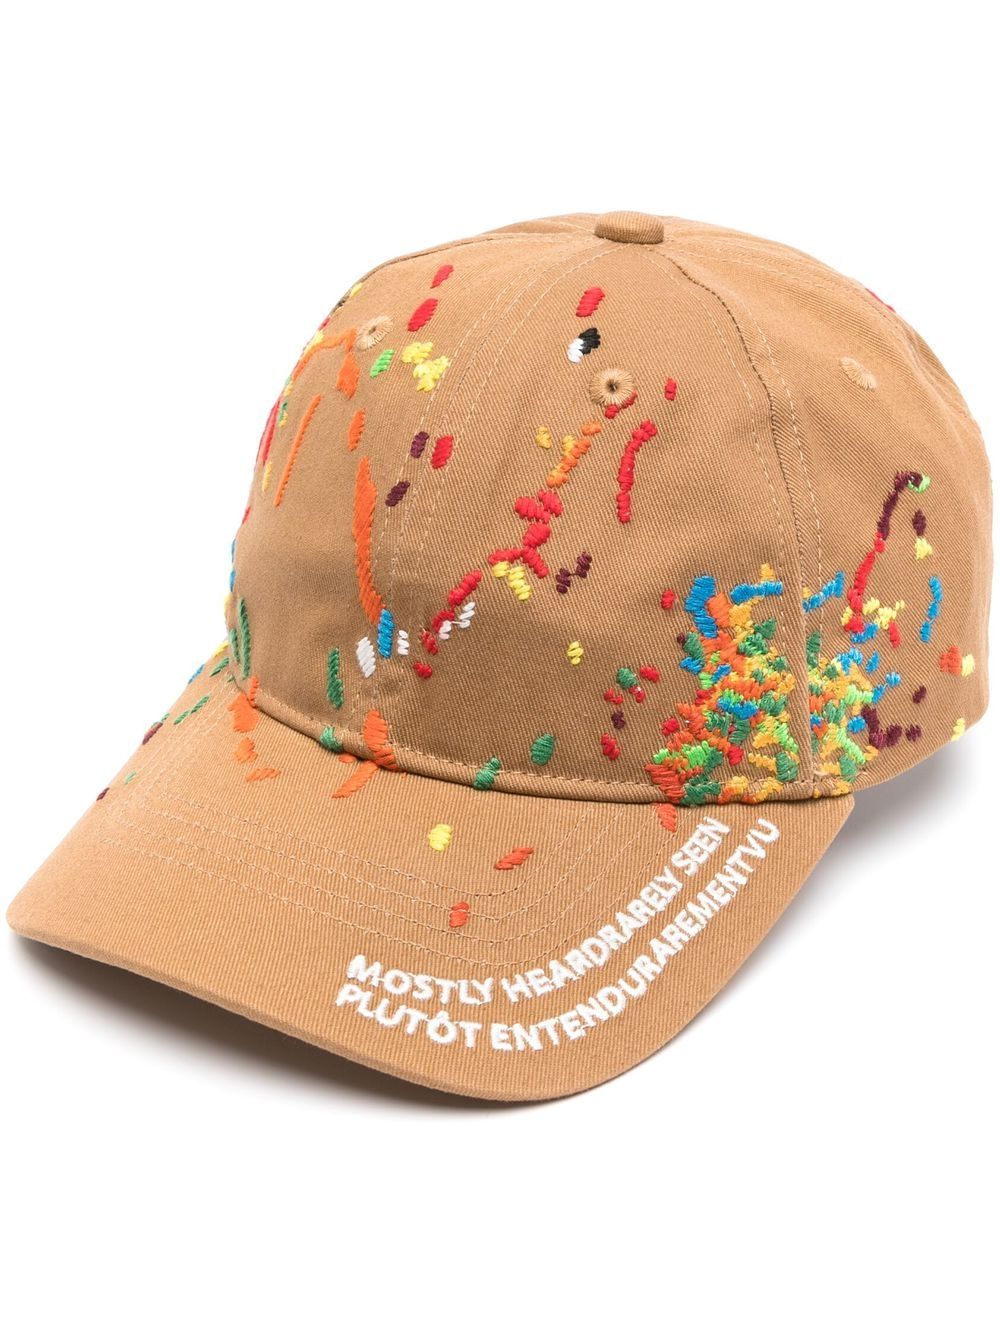 embroidered-paint cotton cap